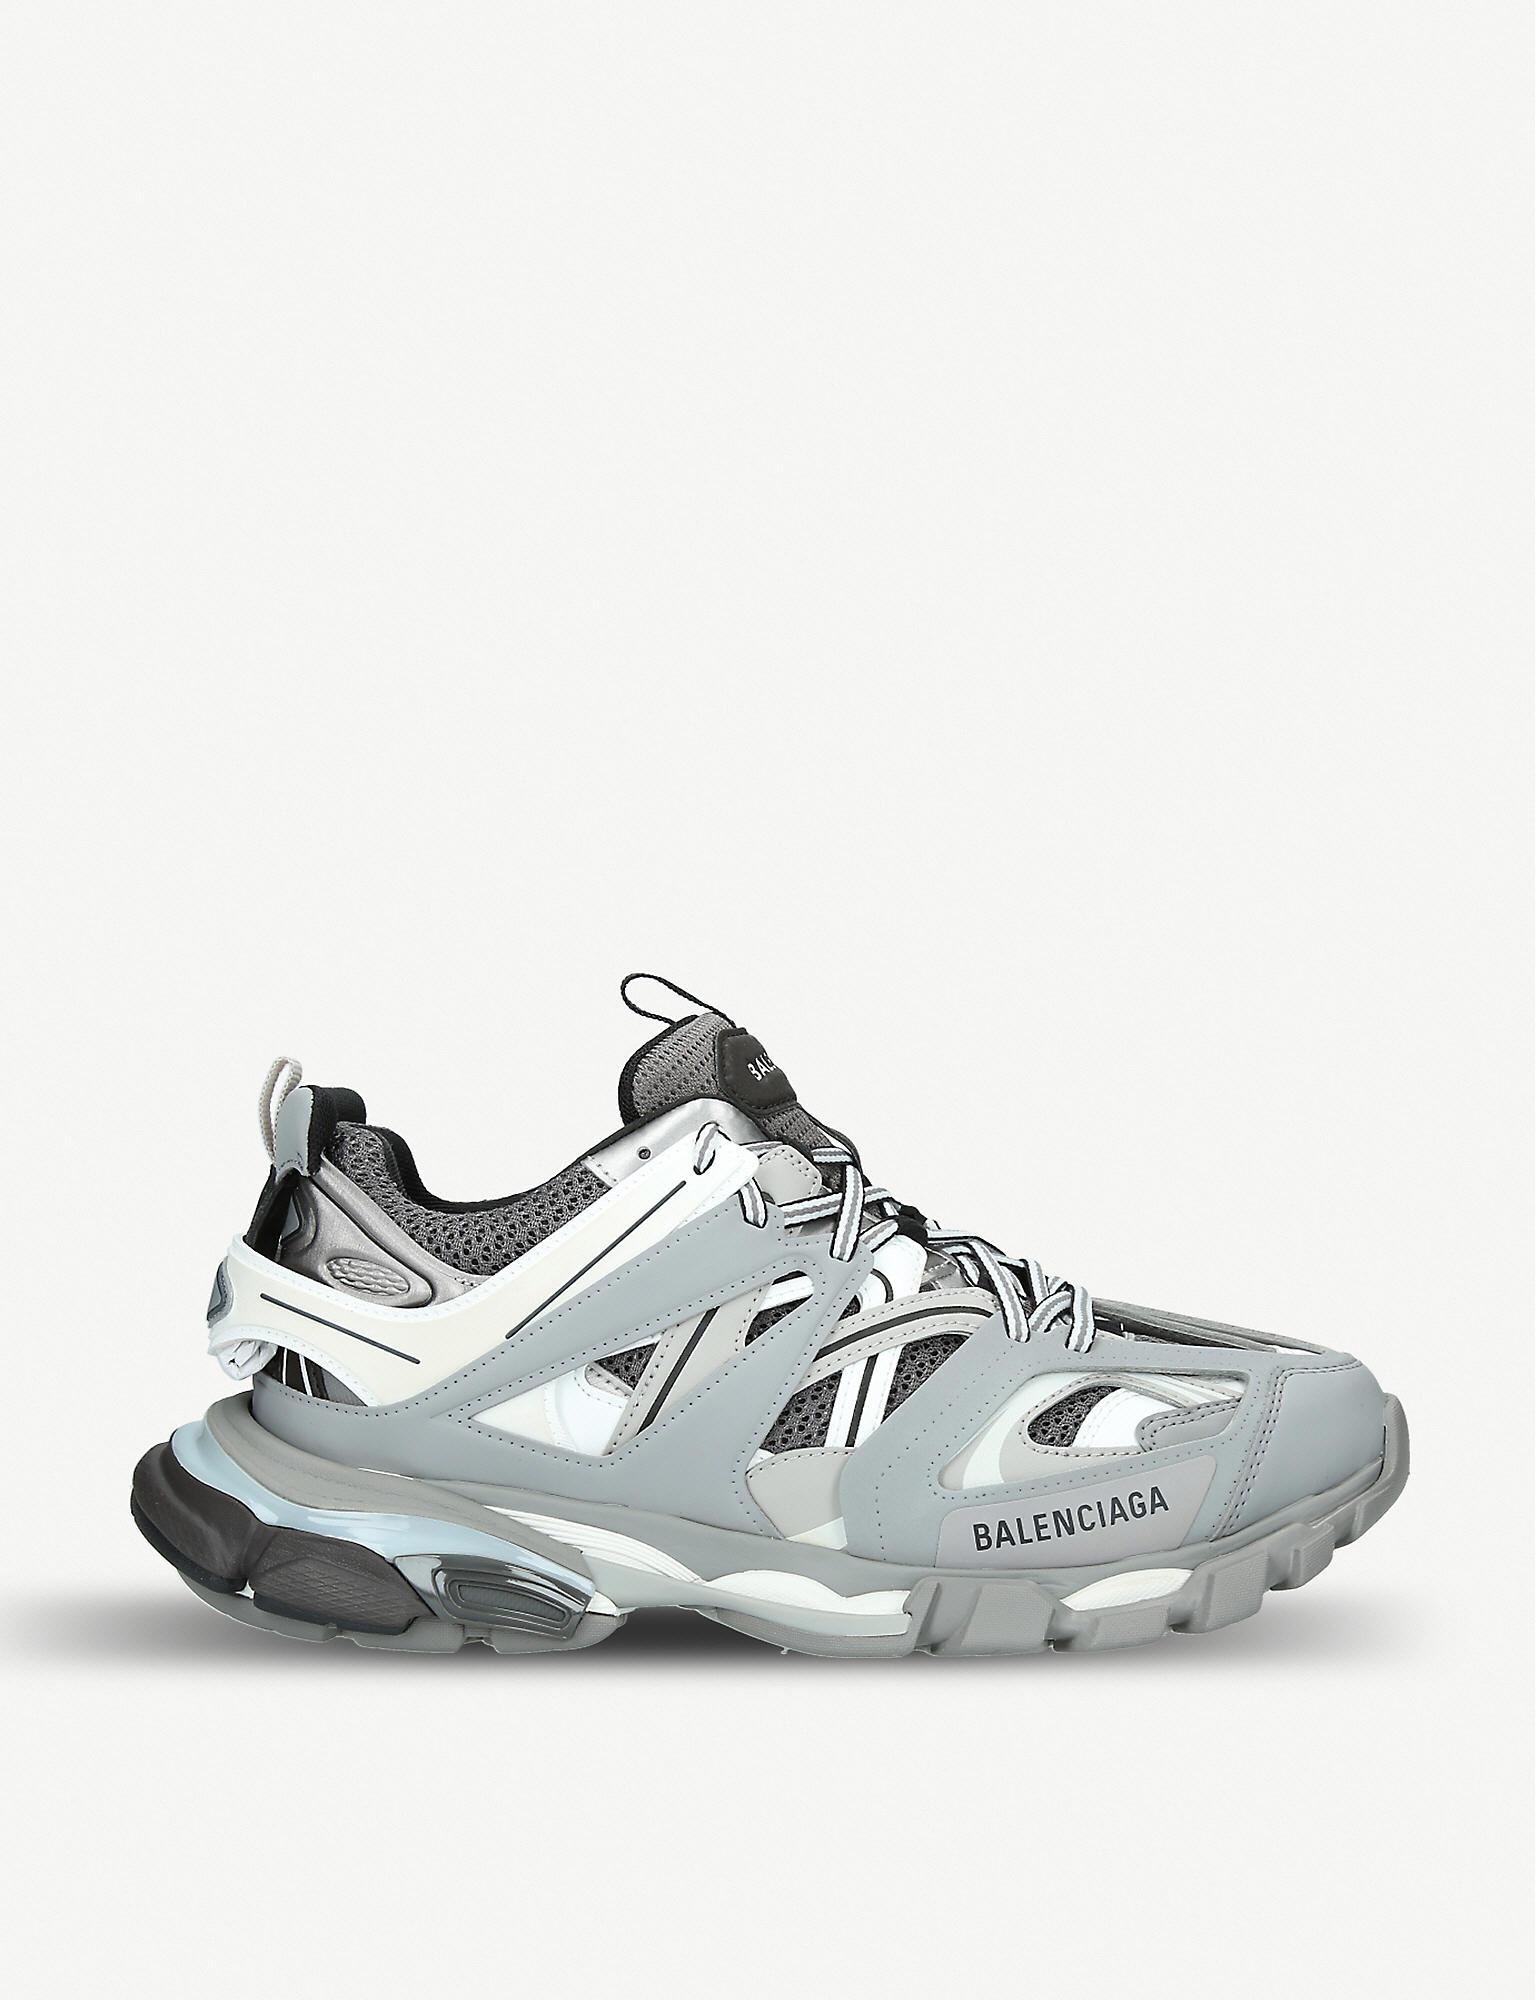 Balenciaga Grey And White Track Sneakers in Gray for Men - Save 44% - Lyst